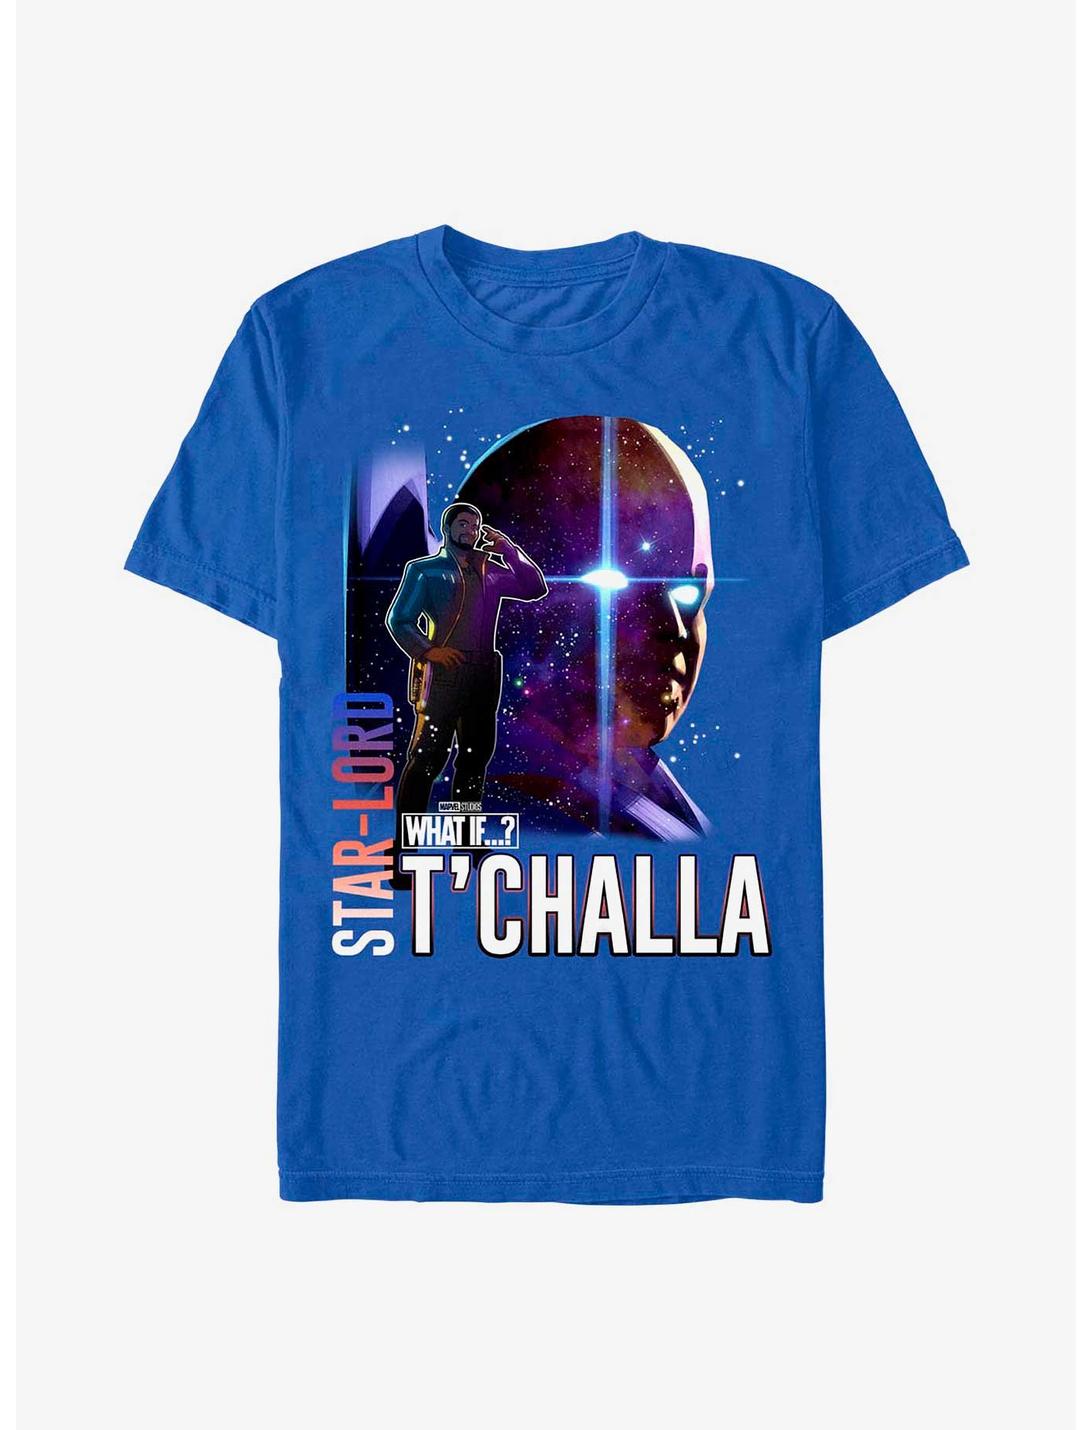 Marvel What If...? Watcher T'Challa T-Shirt, ROYAL, hi-res